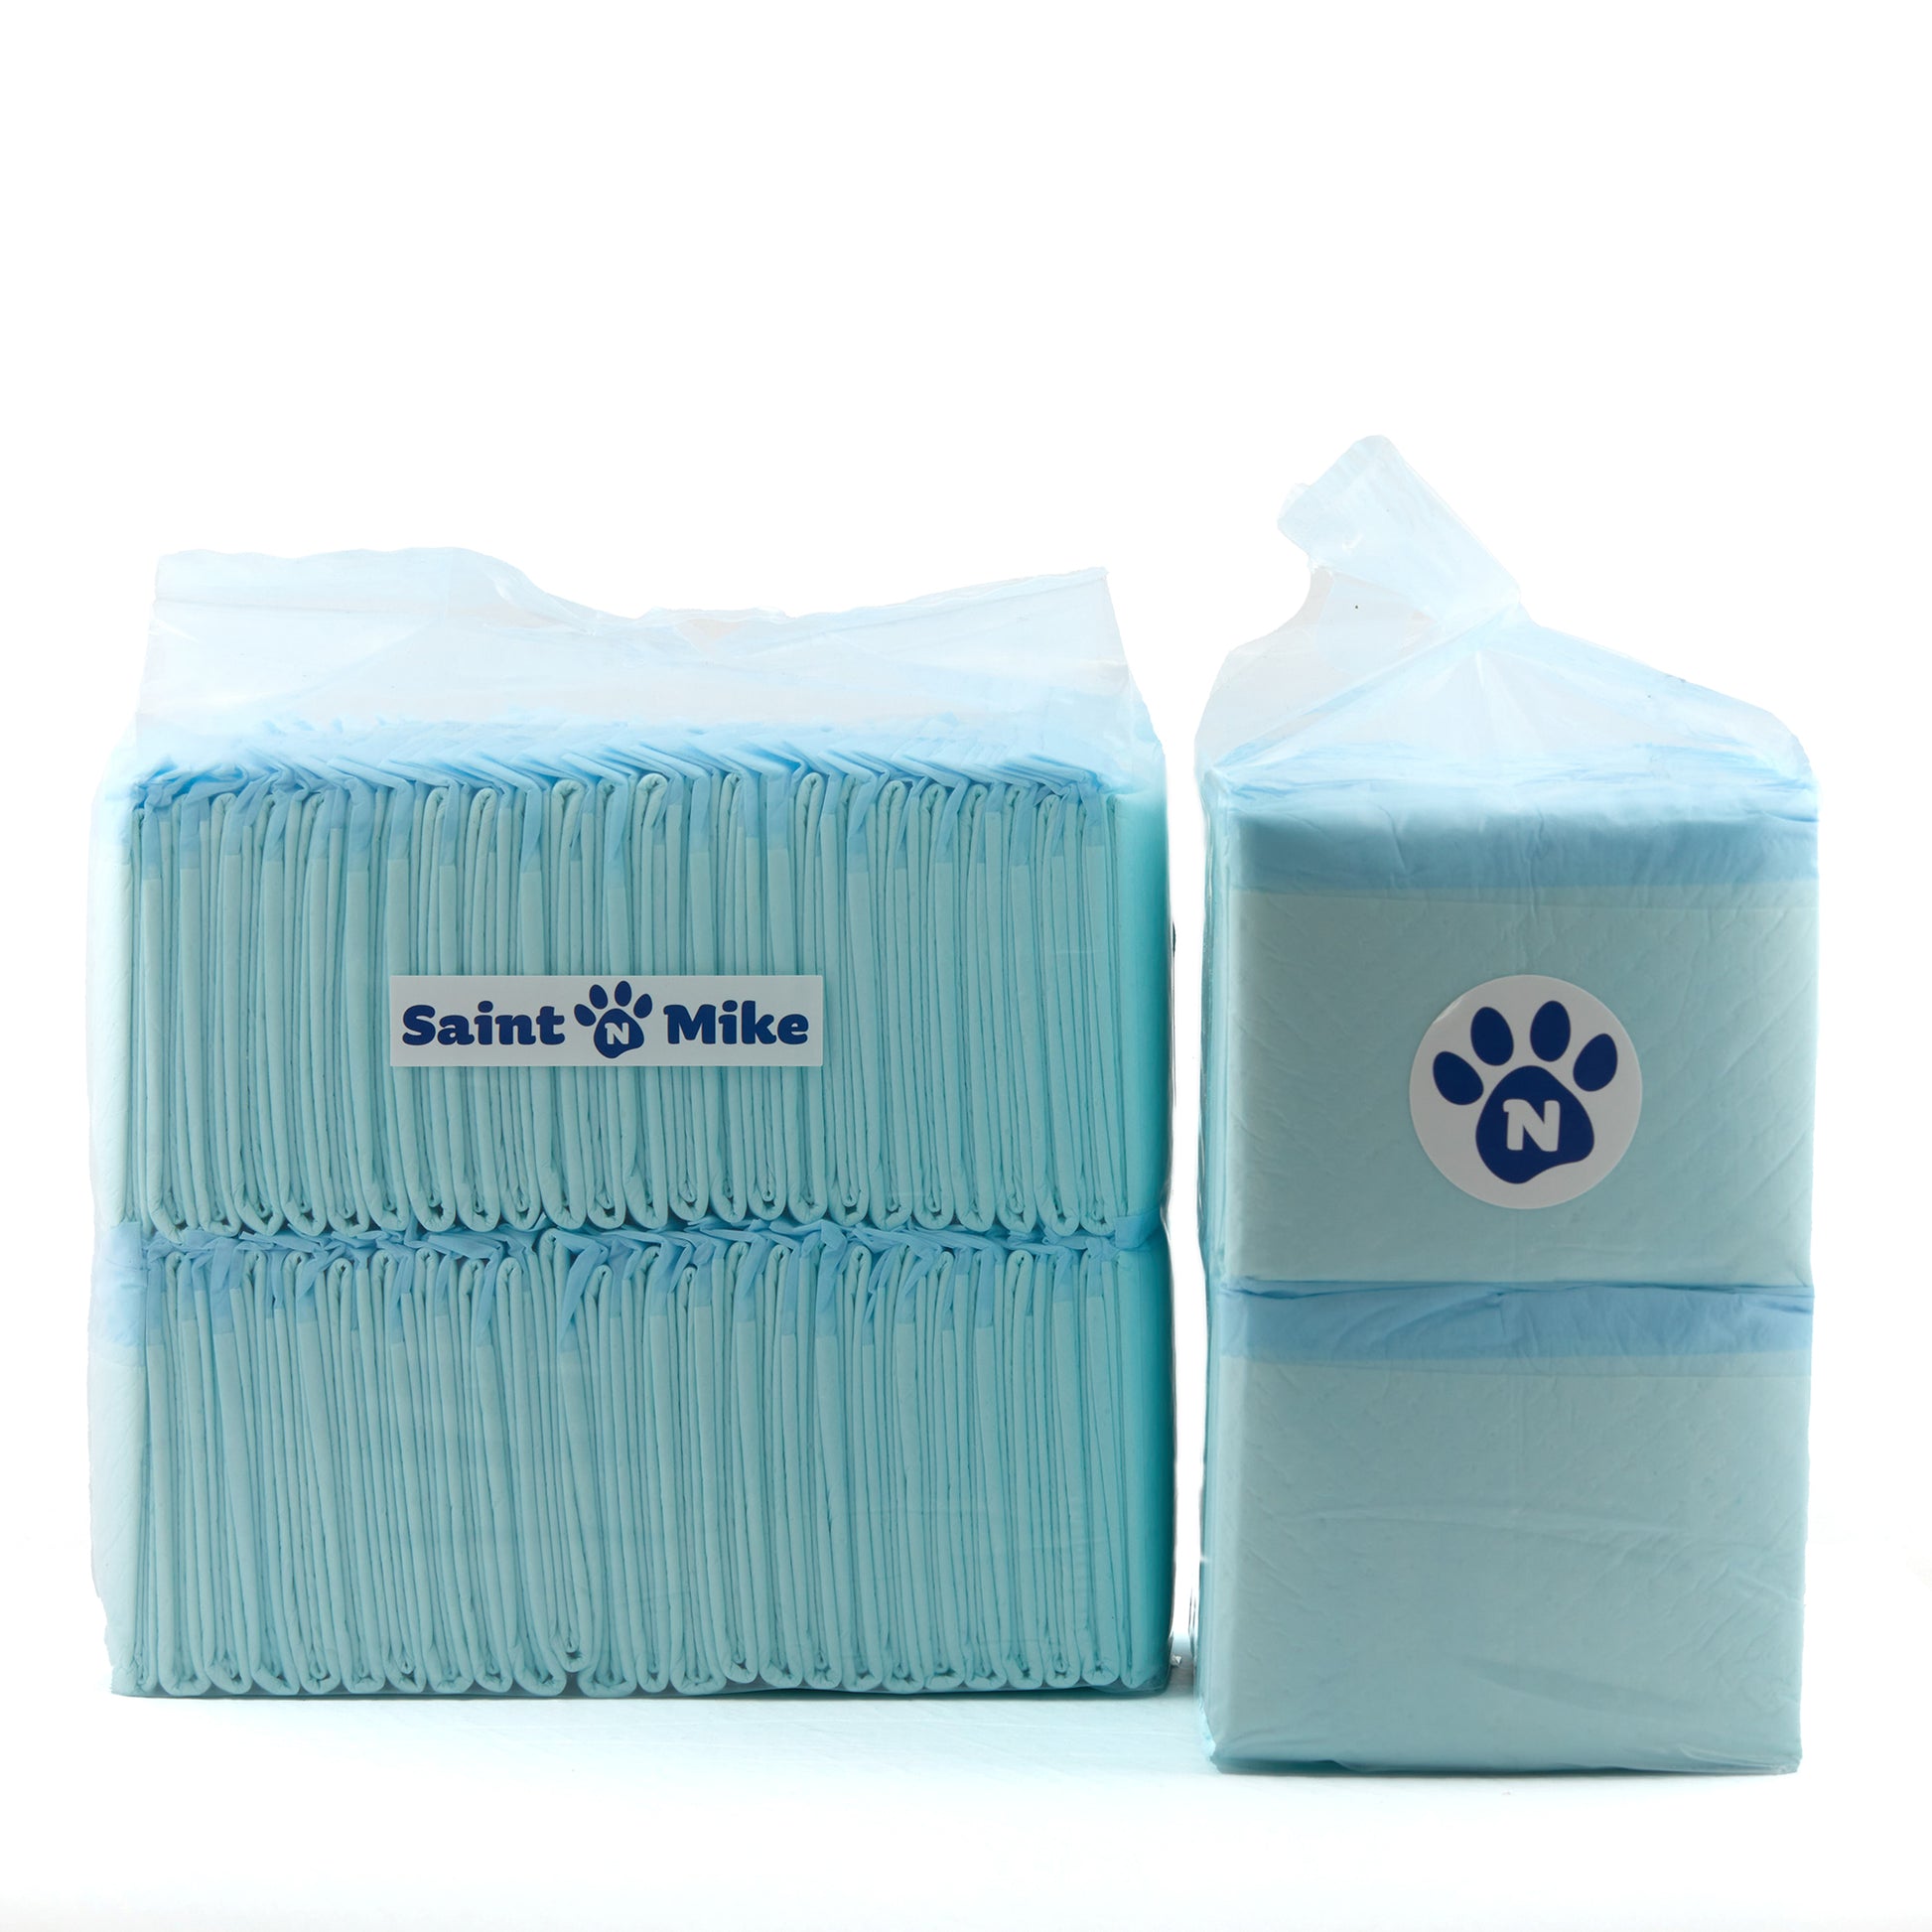 medium size, 100 count high-quality puppy pad leak-proof for hassle-free house training8